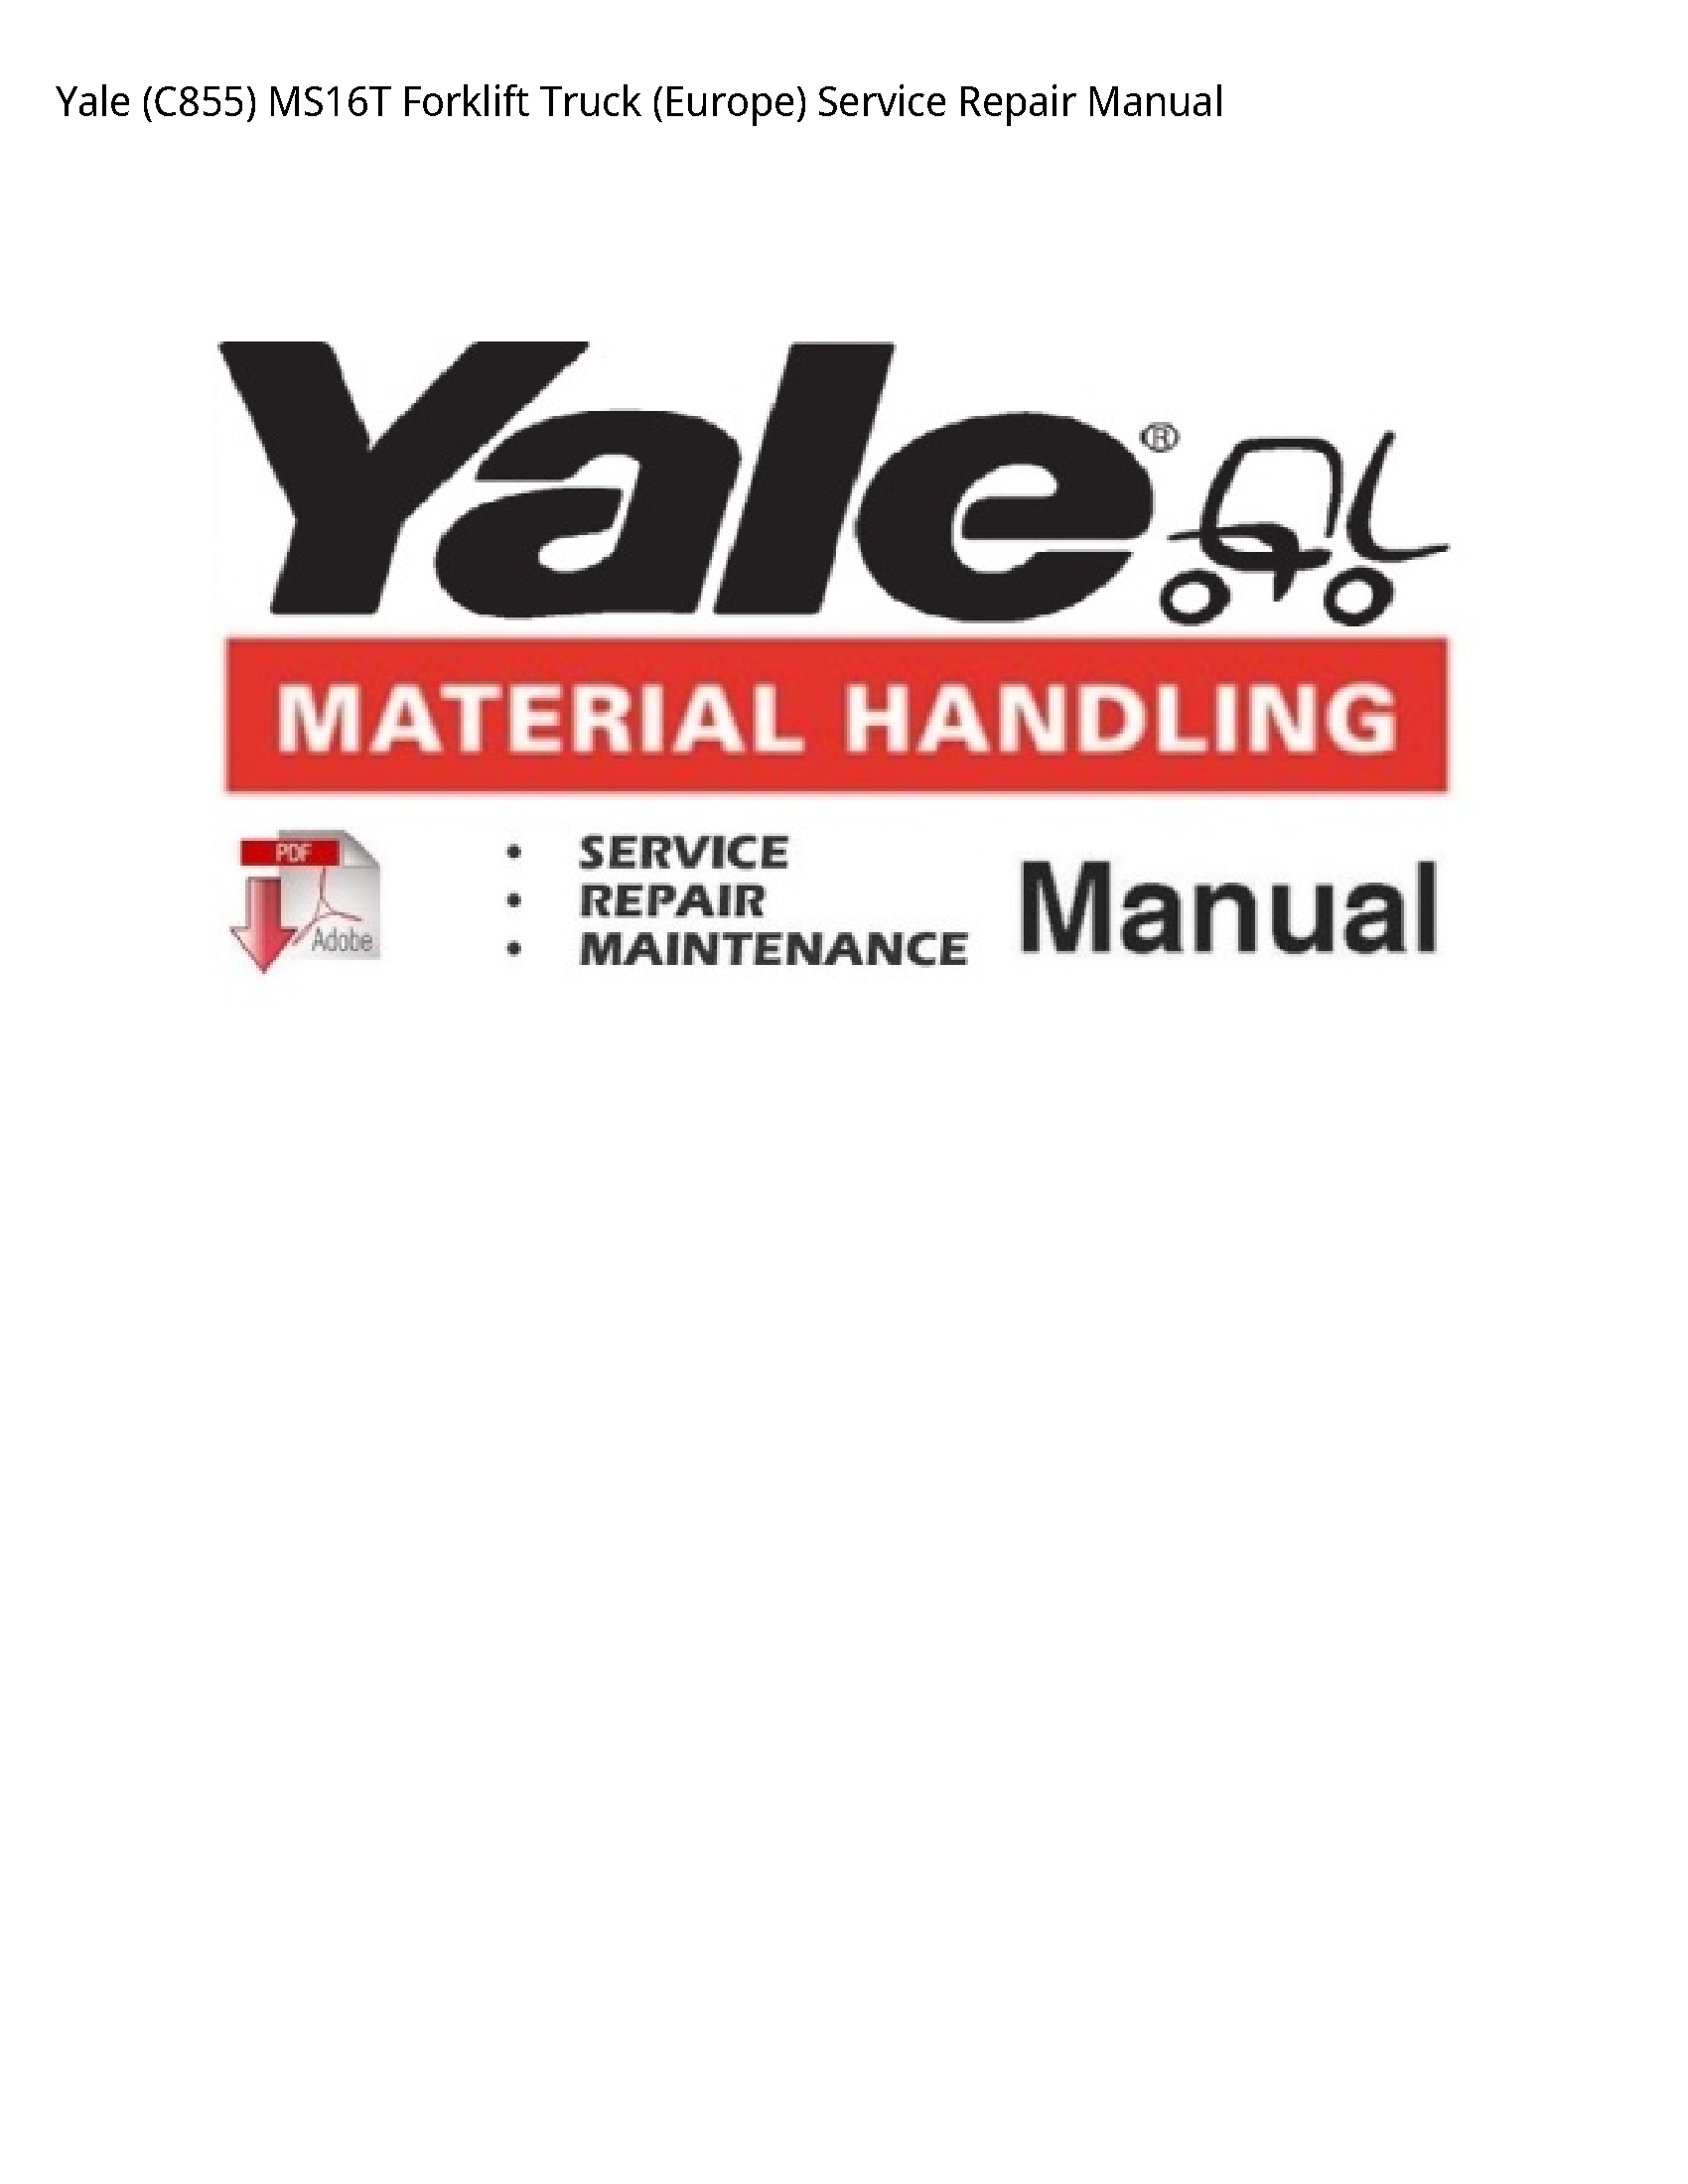 Yale (C855) Forklift Truck (Europe) manual